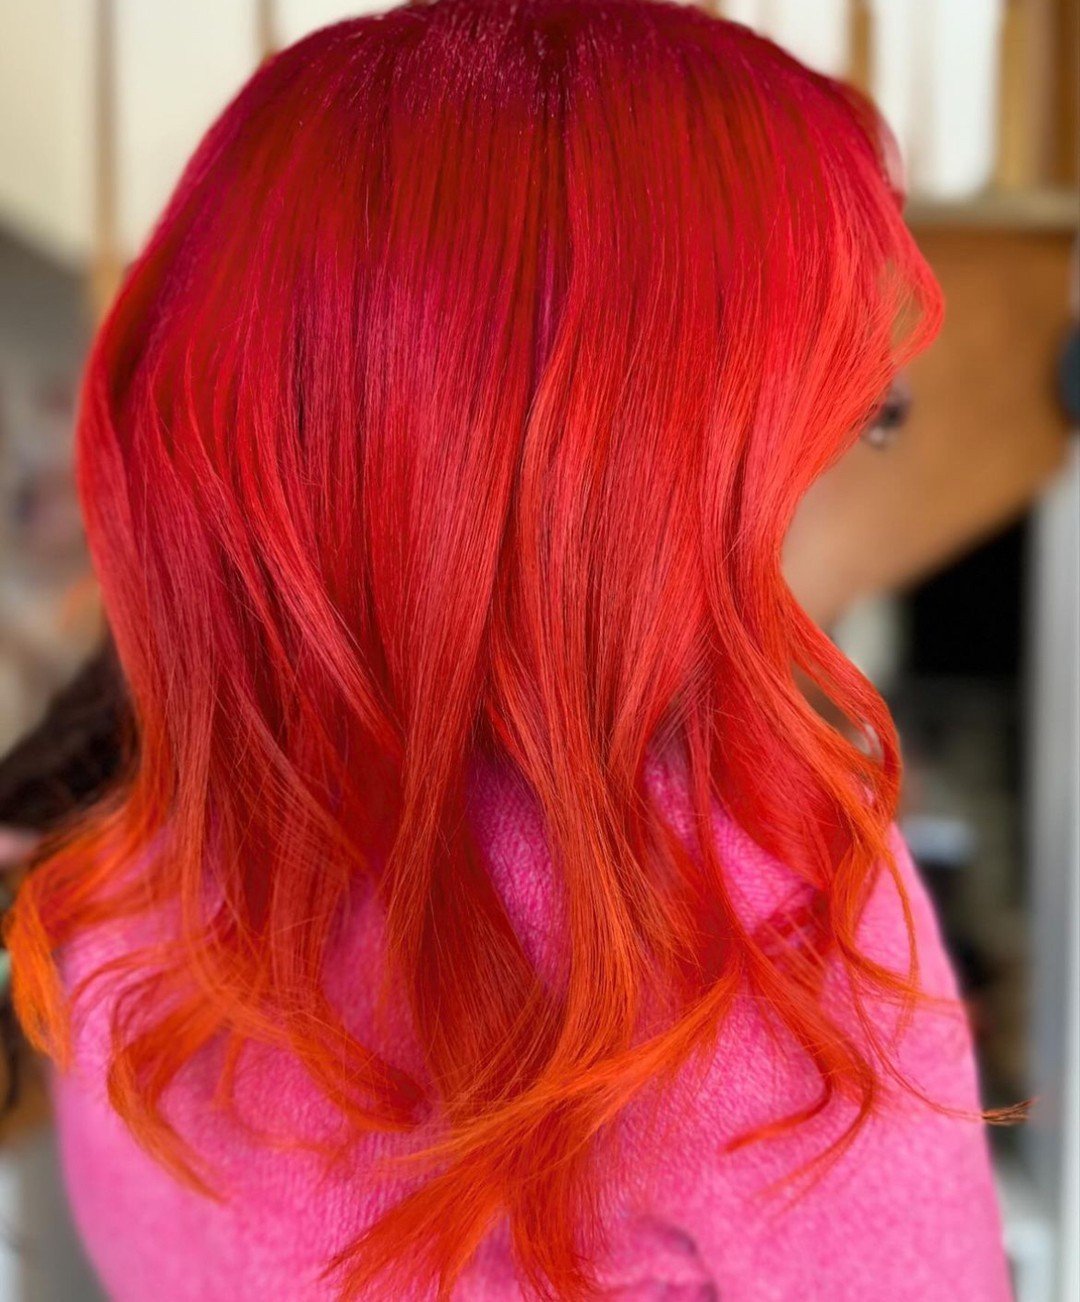 That's it, we decided. We're making vivids super trendy again in 2024.

Color should be fun!

So if you're ready to have some fun with your color this spring, you just met your new favorite salon.

Vivd color by @styledbymercedes.ct! To book with us,